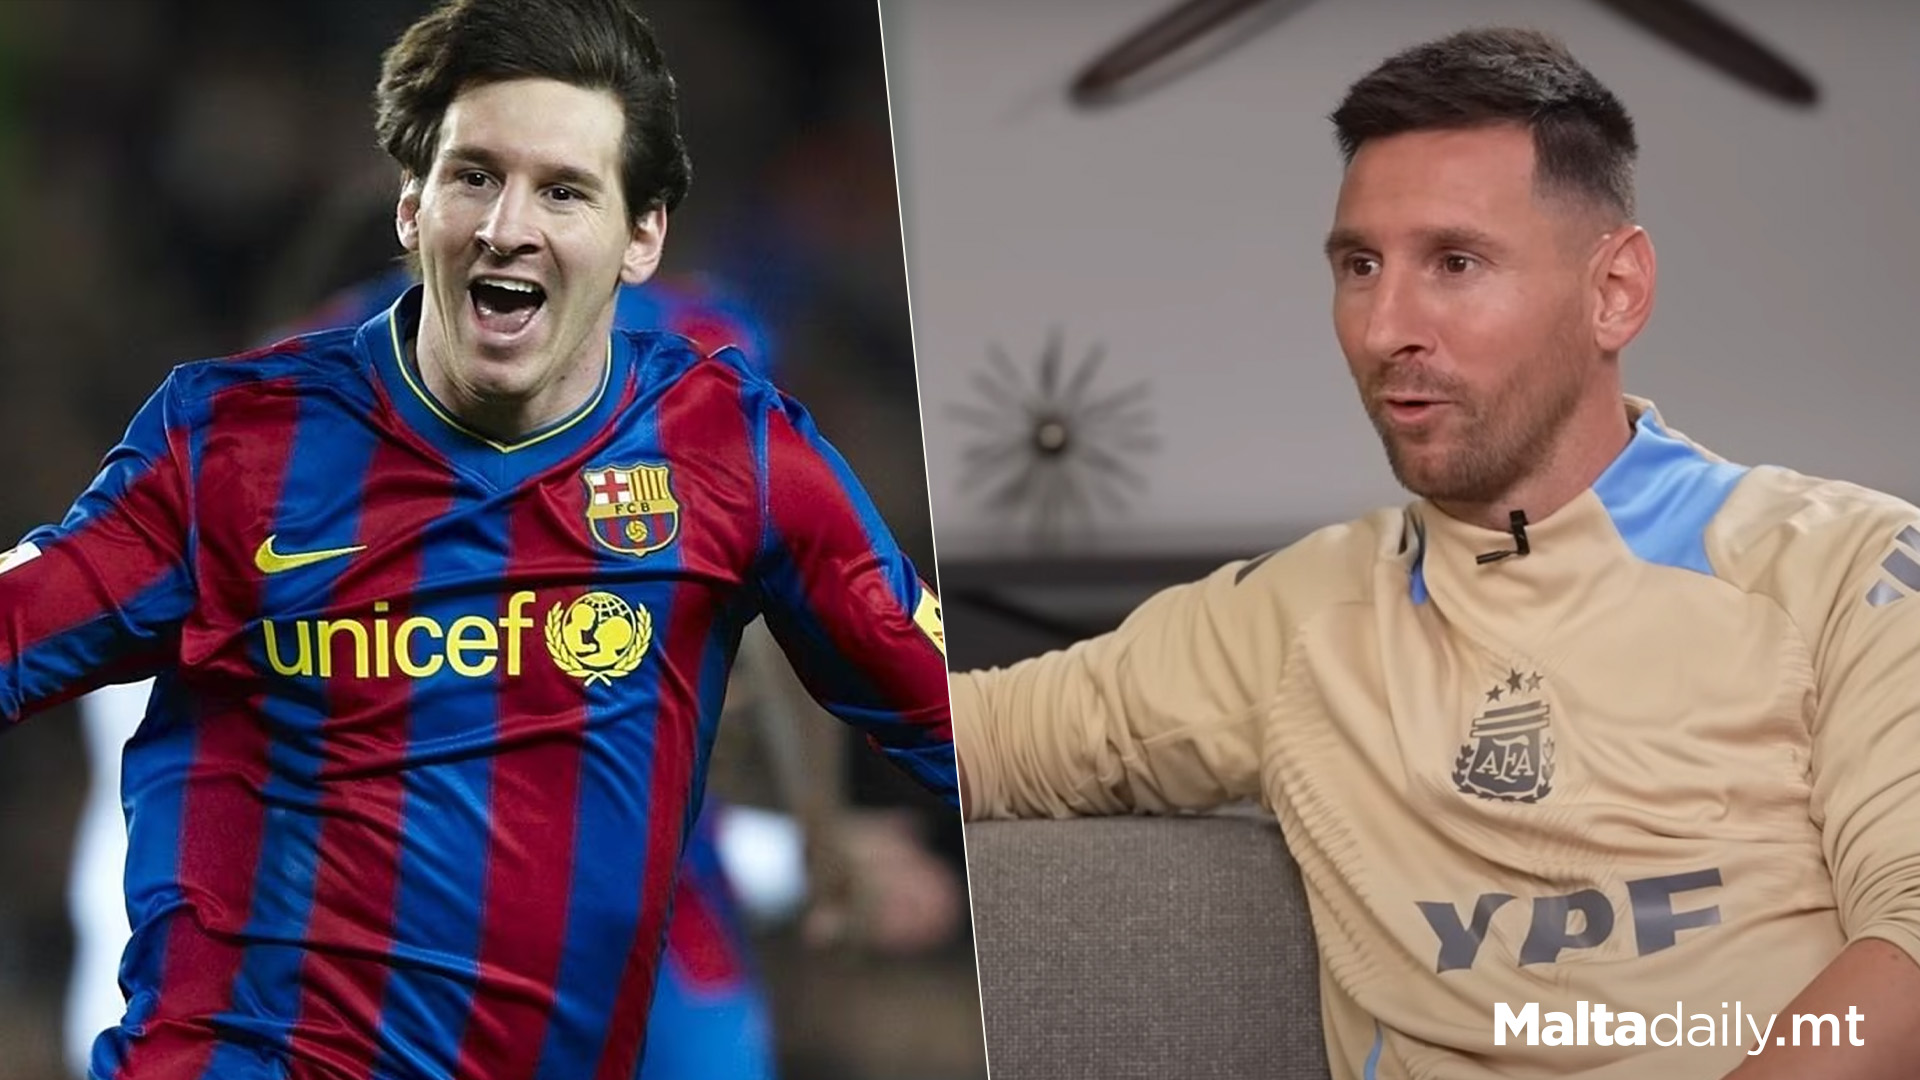 Messi Opens Up About Mental Health During Time With Barcelona